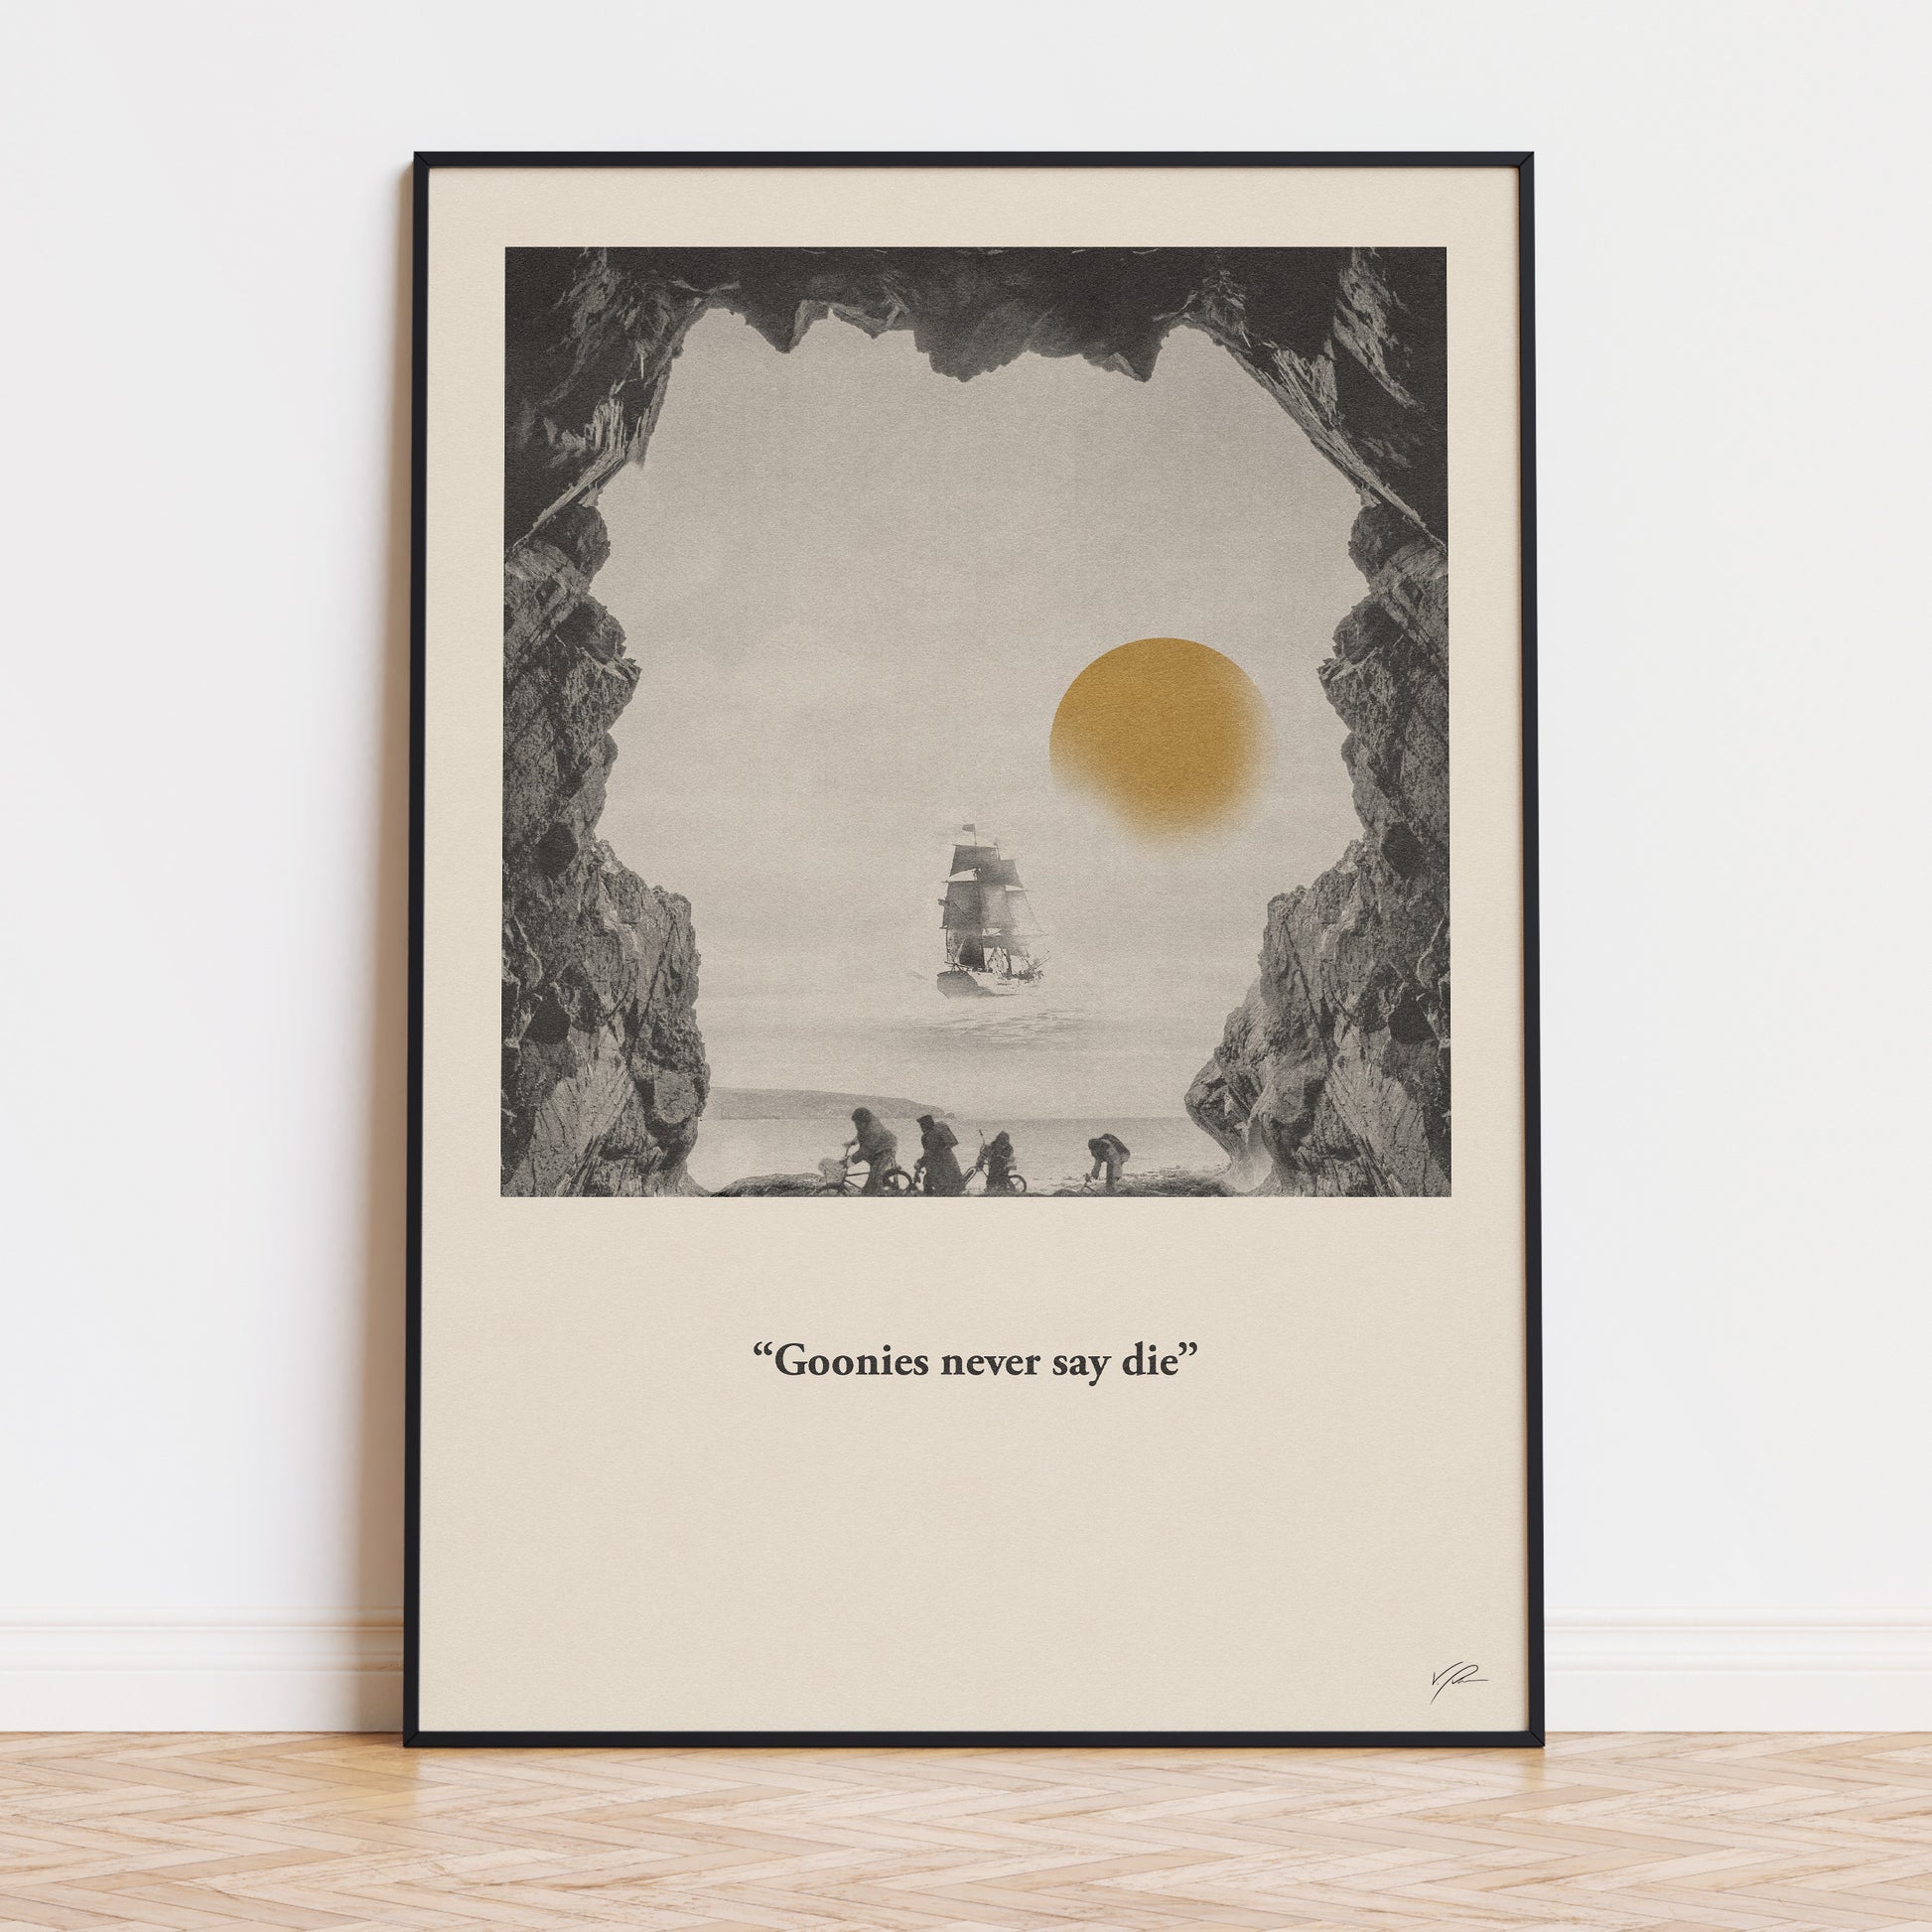 Print art of the classic movie The Goonies featuring kids on an island and a pirate ship including quotes